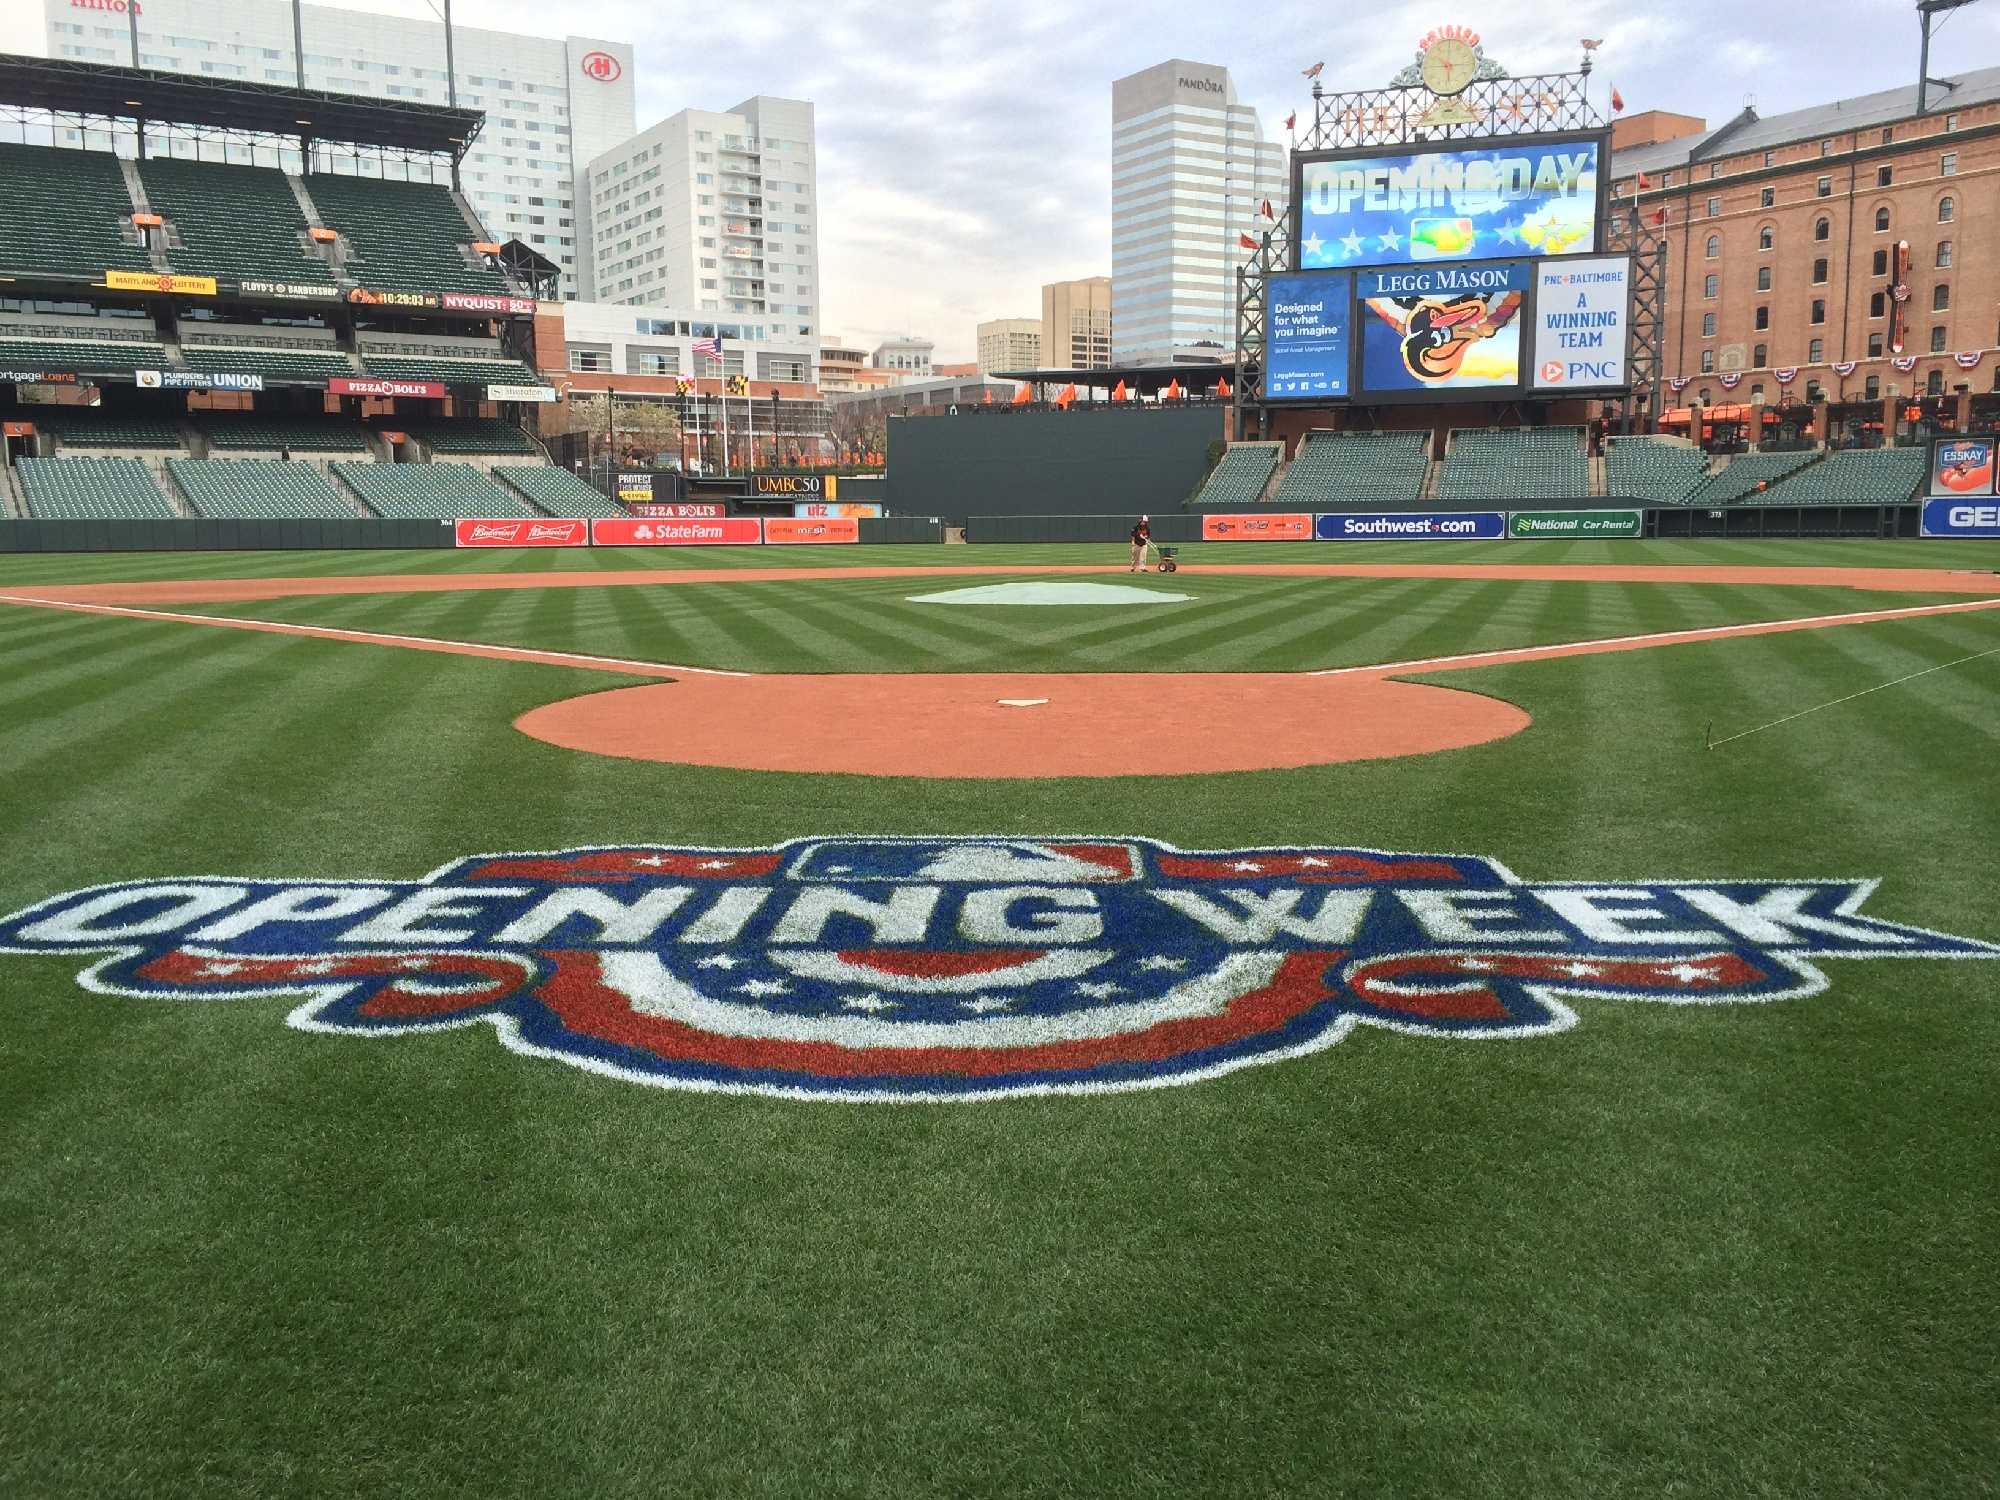 Orioles announce Opening Day plans